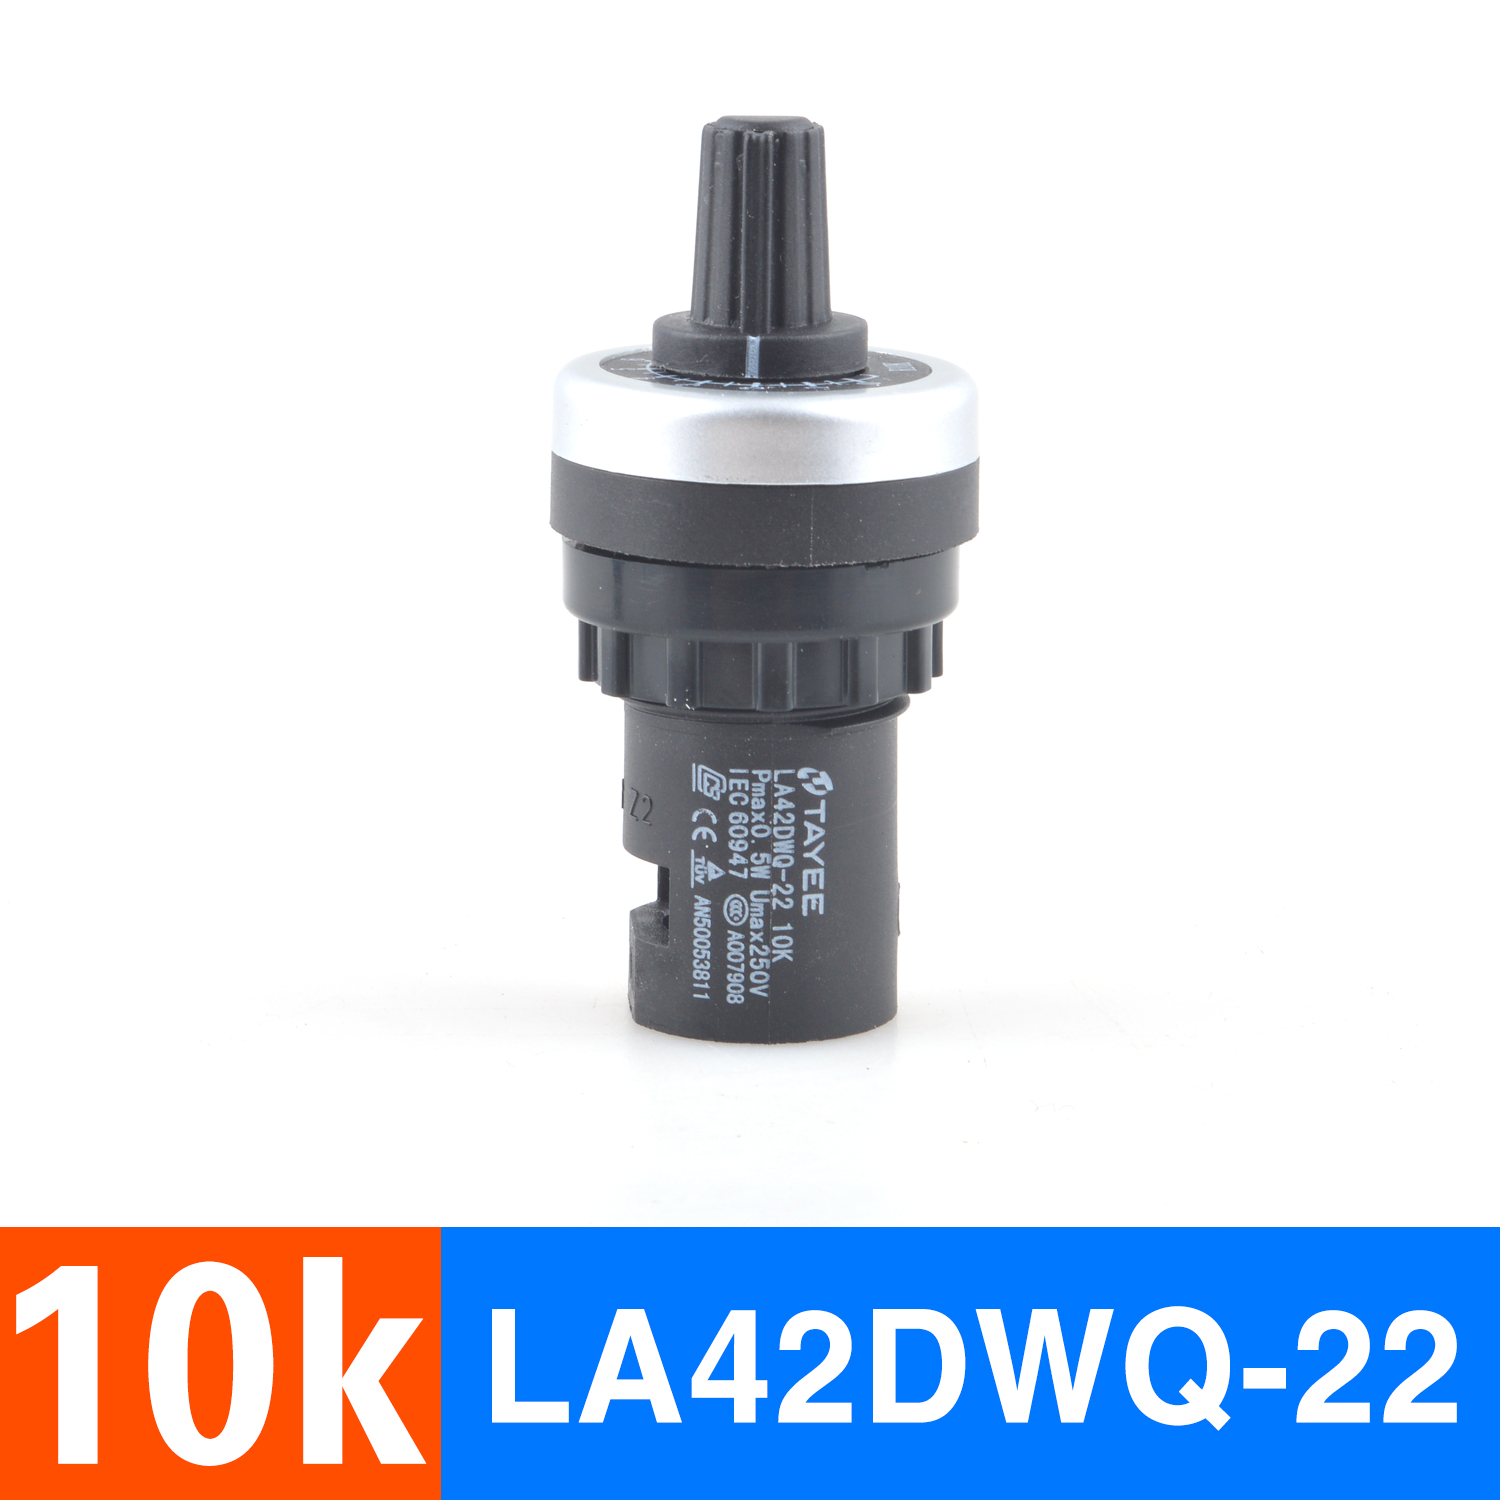 Genuine 10Kquality goods Shanghai Tianyi Frequency converter adjust speed potentiometer precise LA42DWQ-22 governor 22mm5K10K